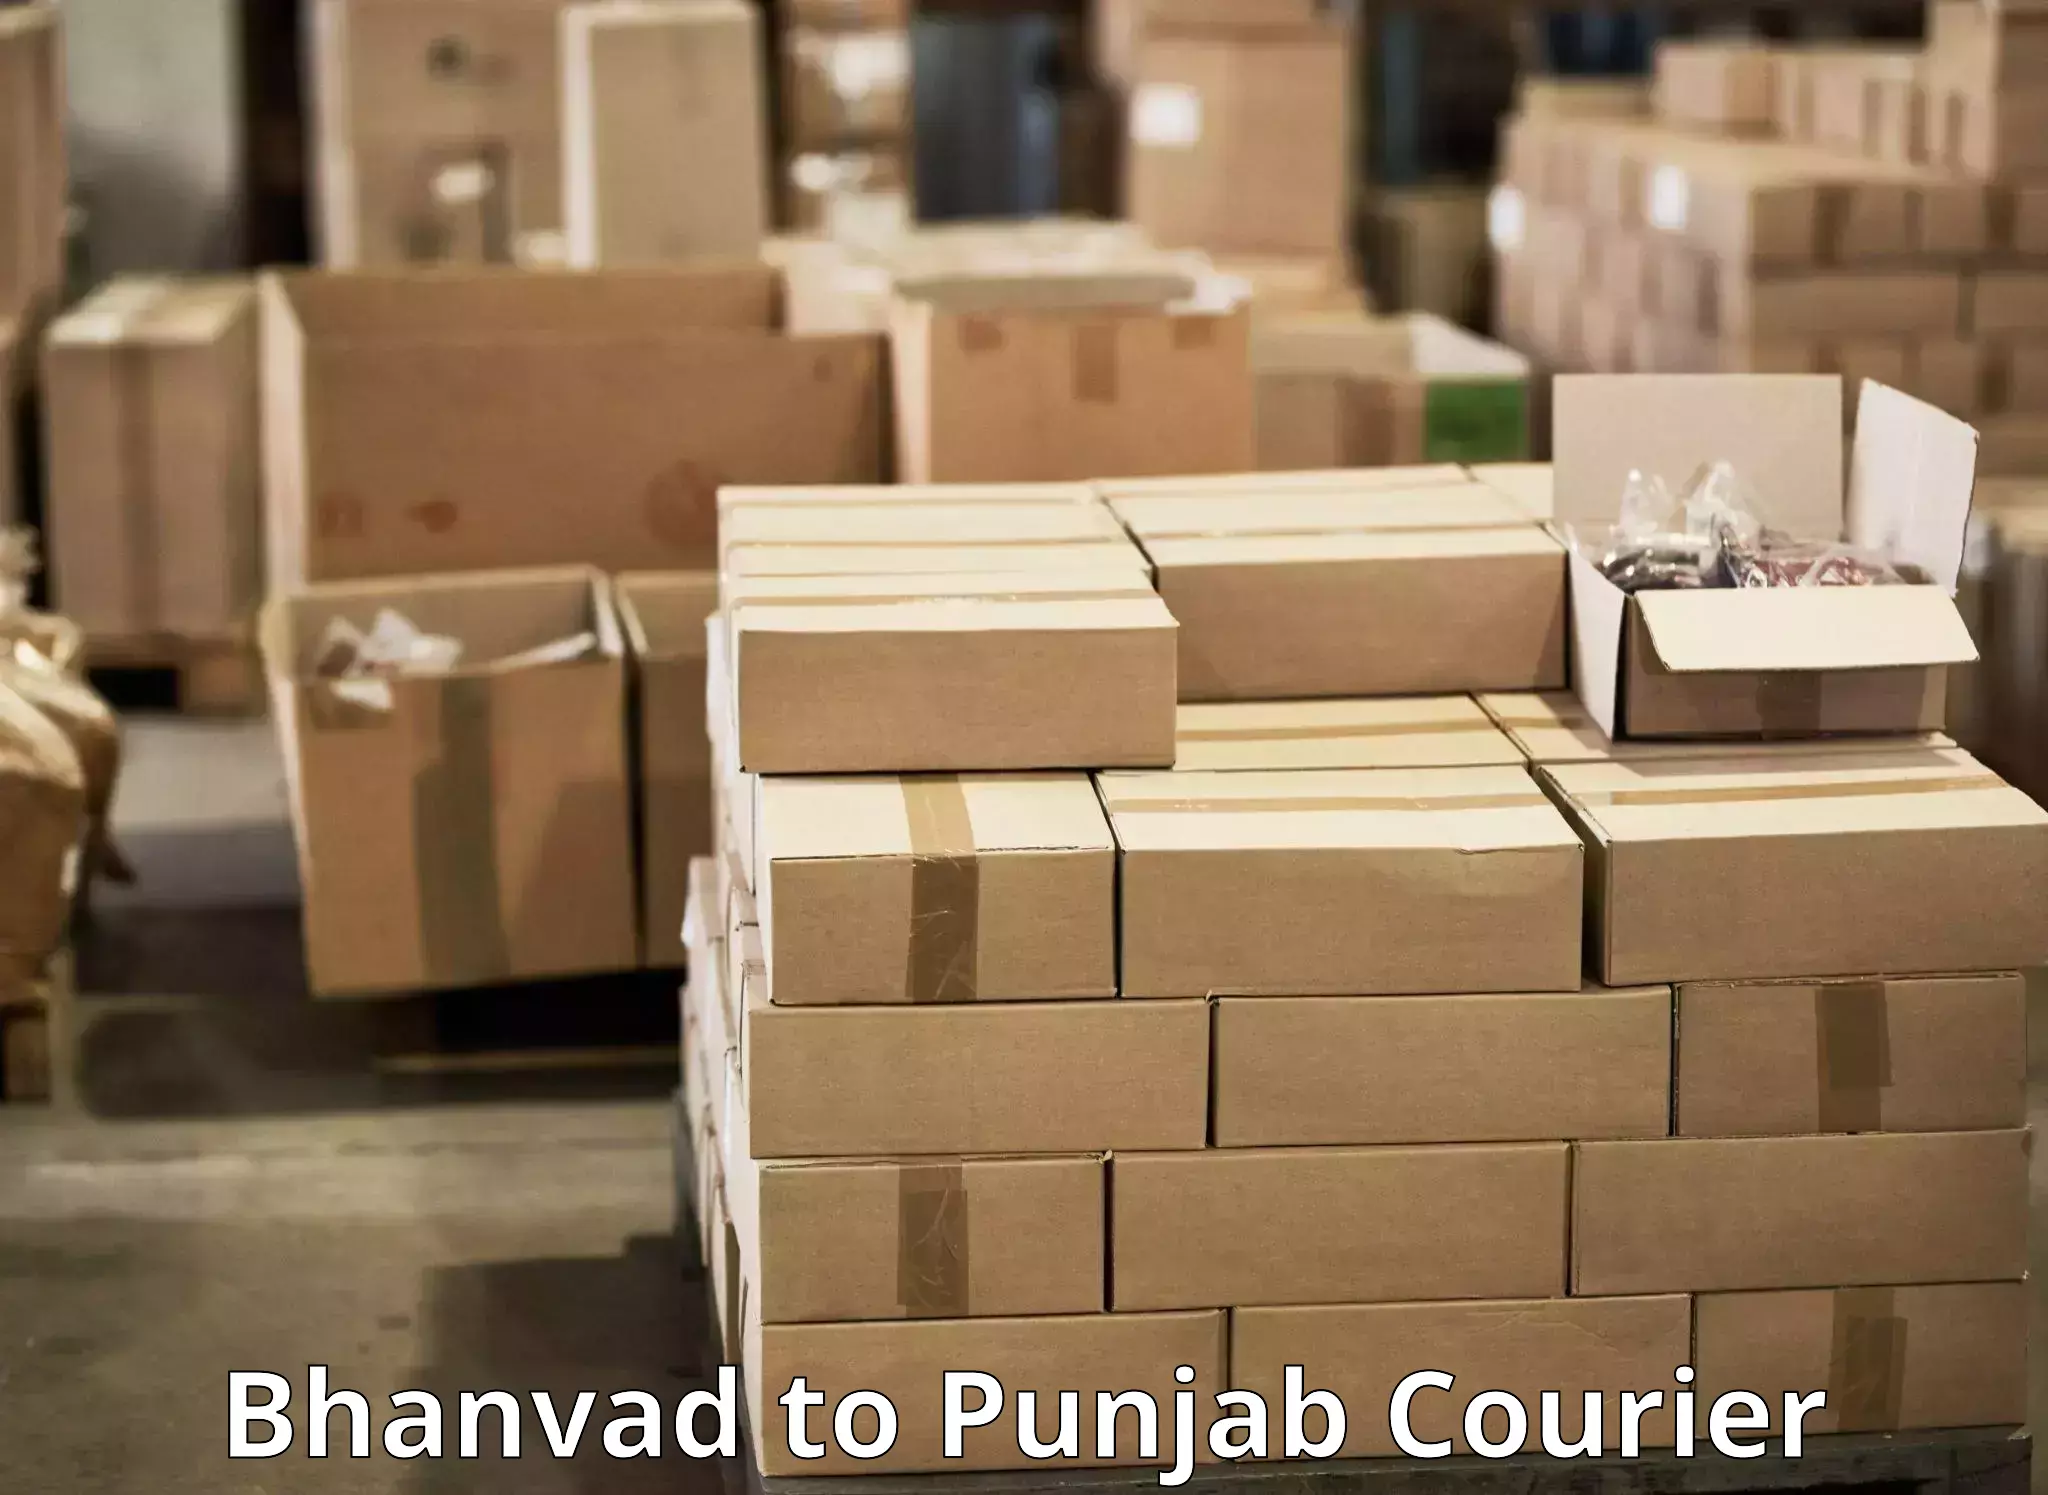 Pharmaceutical courier Bhanvad to Faridkot